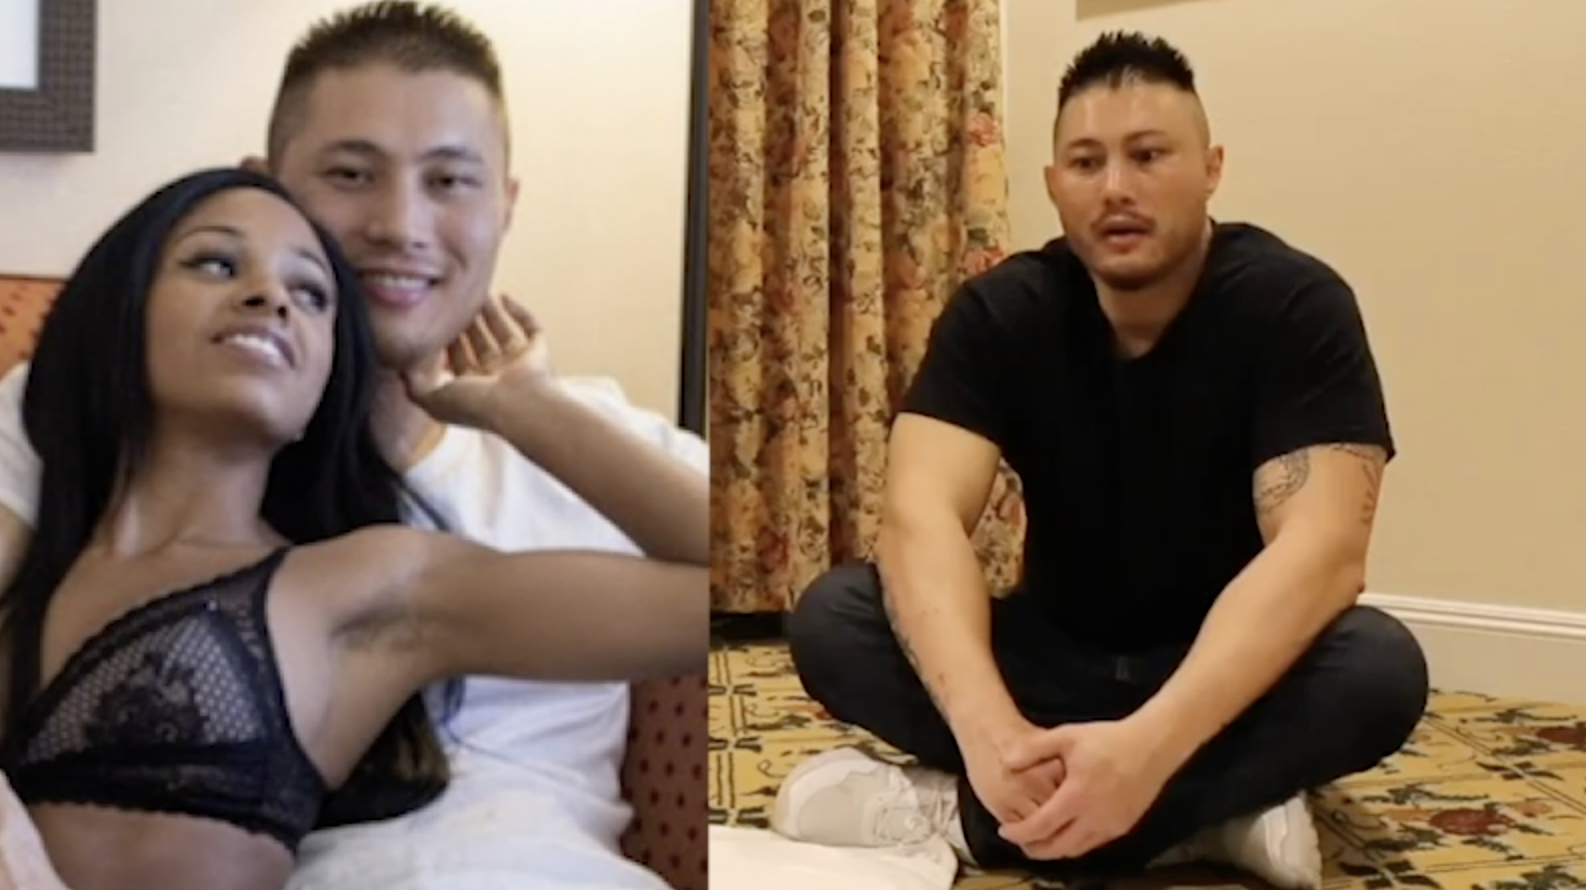 Asian Porn Star Pinky - EXCLUSIVE: Pâ€Œoâ€Œrn Star Jeremy Long Pens Last Statement After Cutting Finger  Off and Retiring 'Forever'